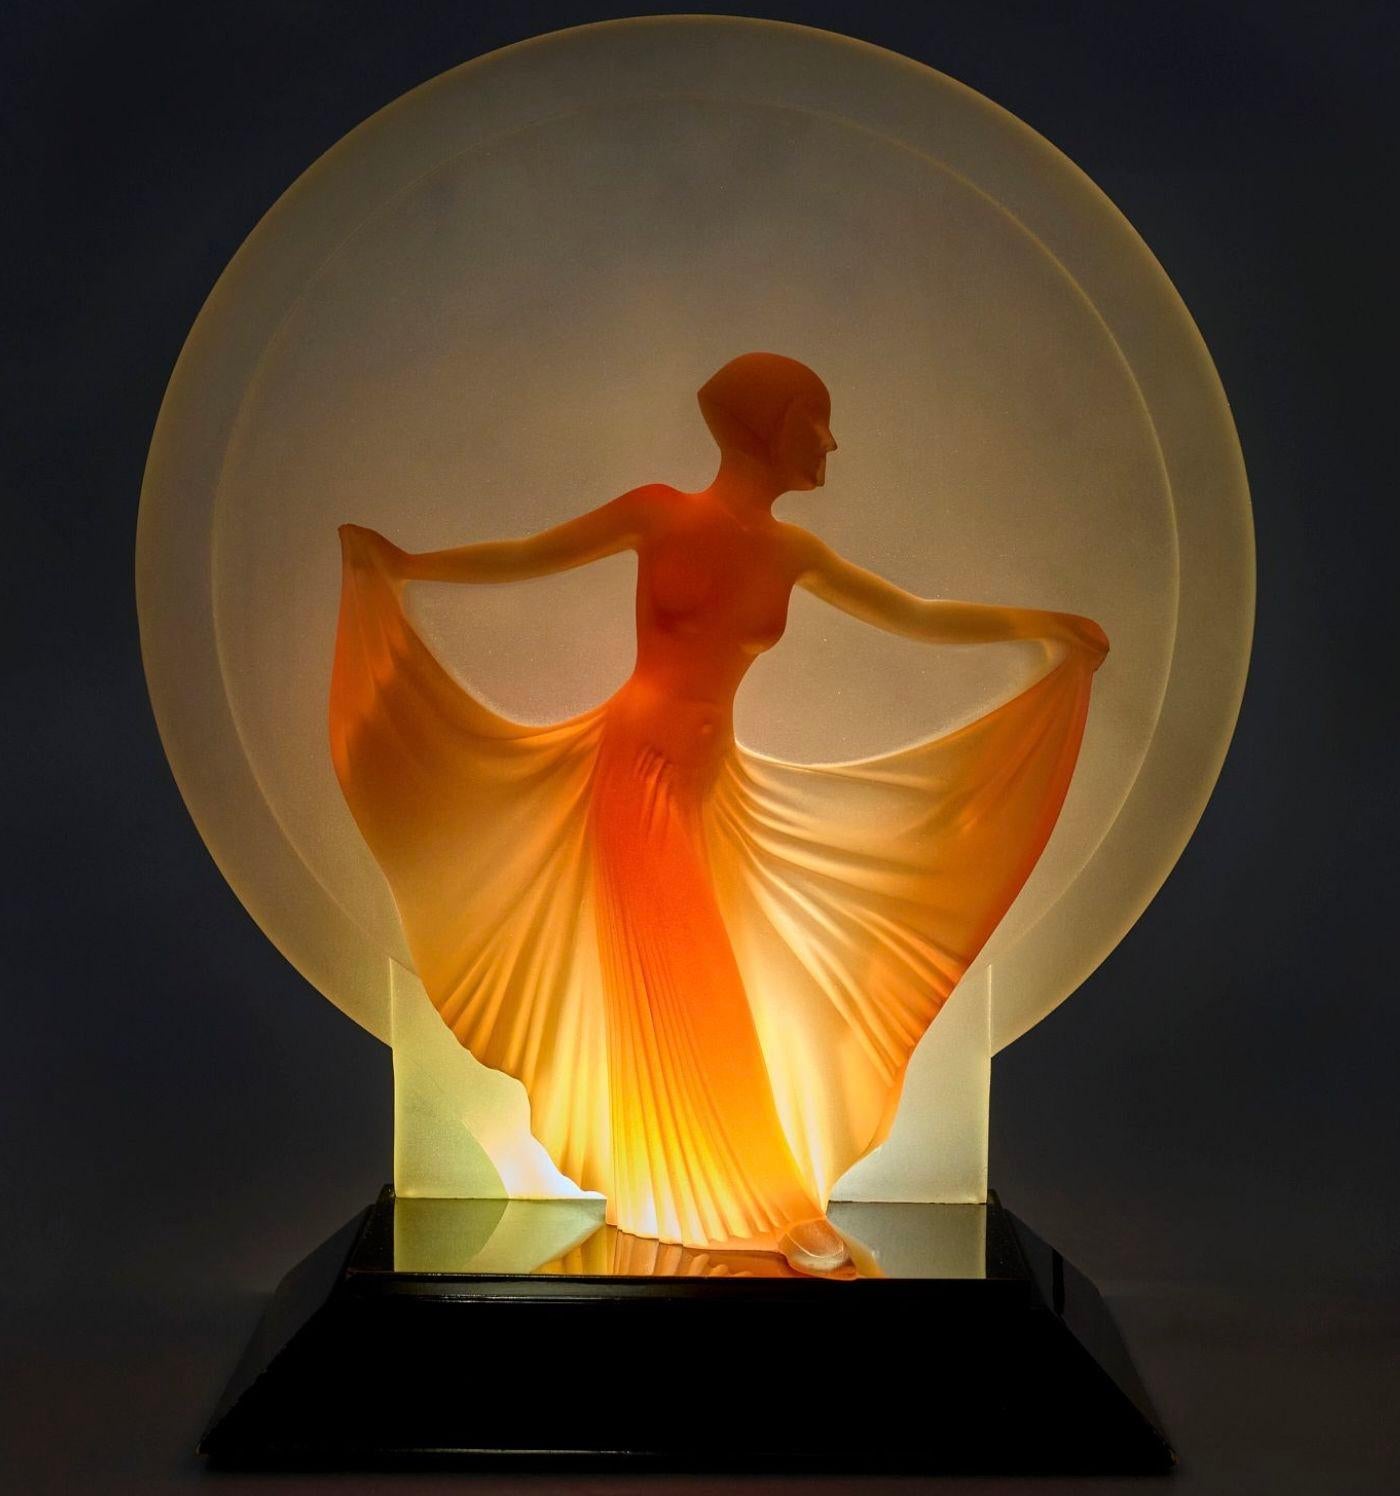 Alluring sculptural lamp made of resin depicting a young female dancer flowing her skirt. It's supported by a rectangular base and has a center round background. Made by Martin Russel, USA, 1989. It is numbered 2/50 of the edition.
Signed by the